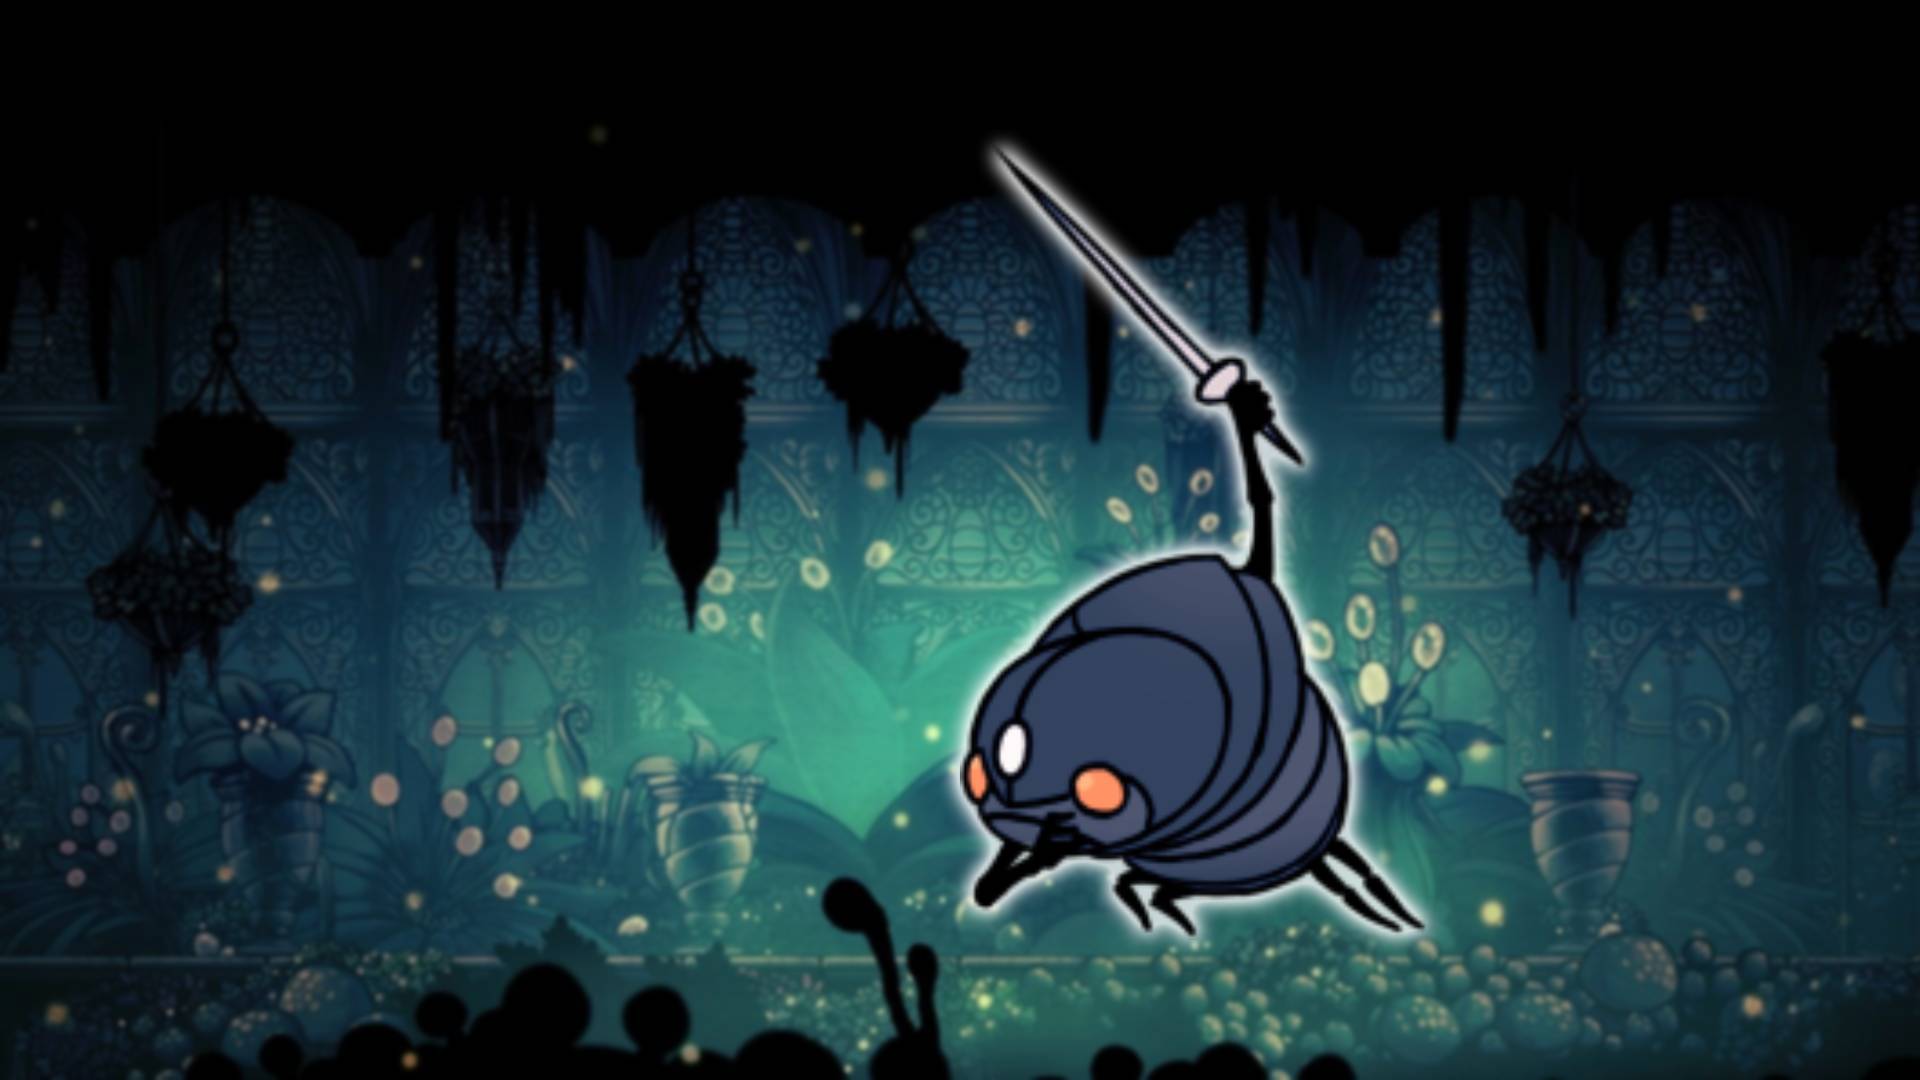 Soul Warrior - the Hollow Knight boss, is visible against a mossy green background area from Hollow Knight 